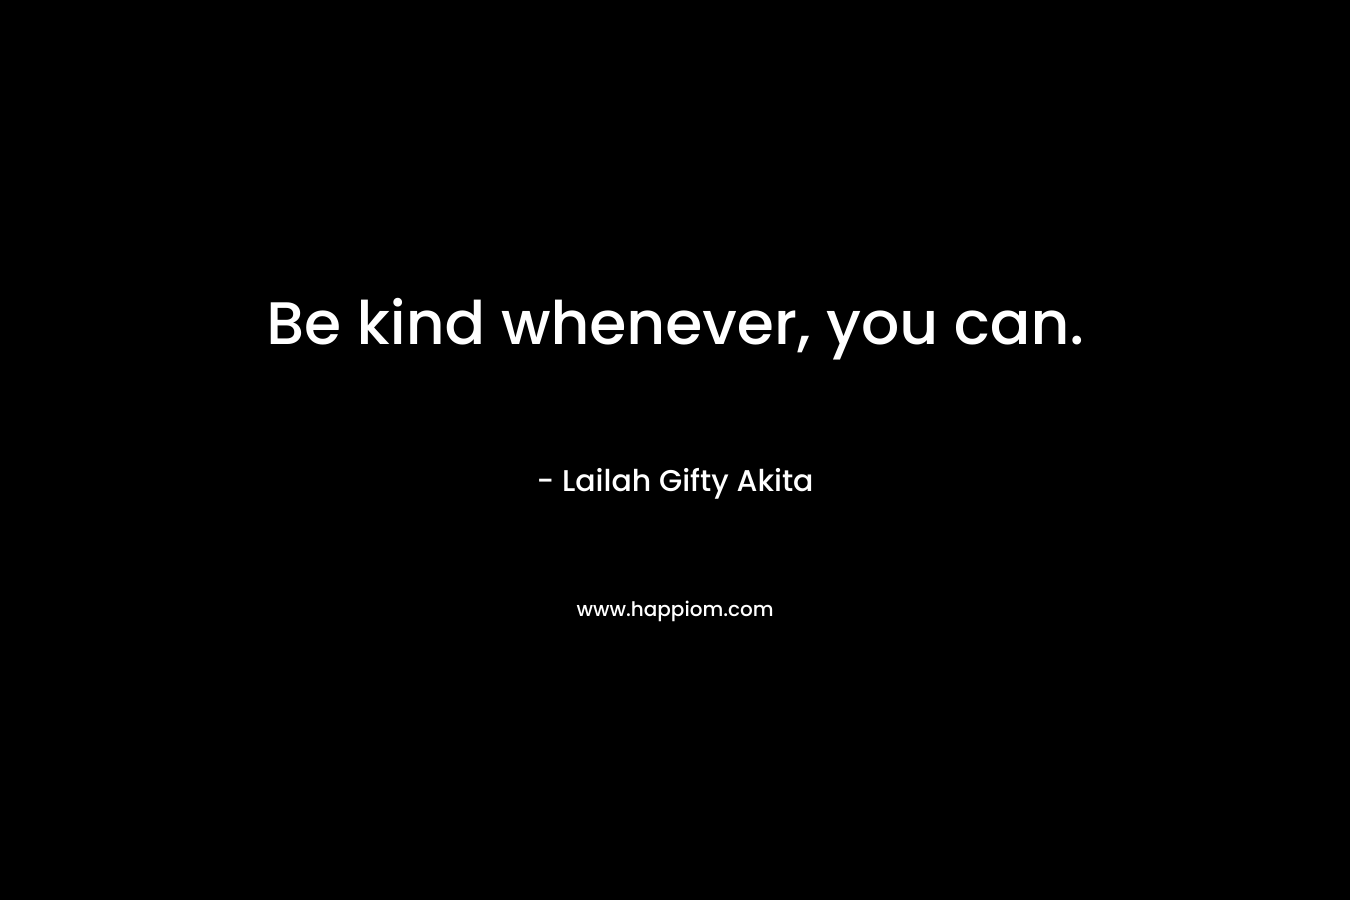 Be kind whenever, you can.